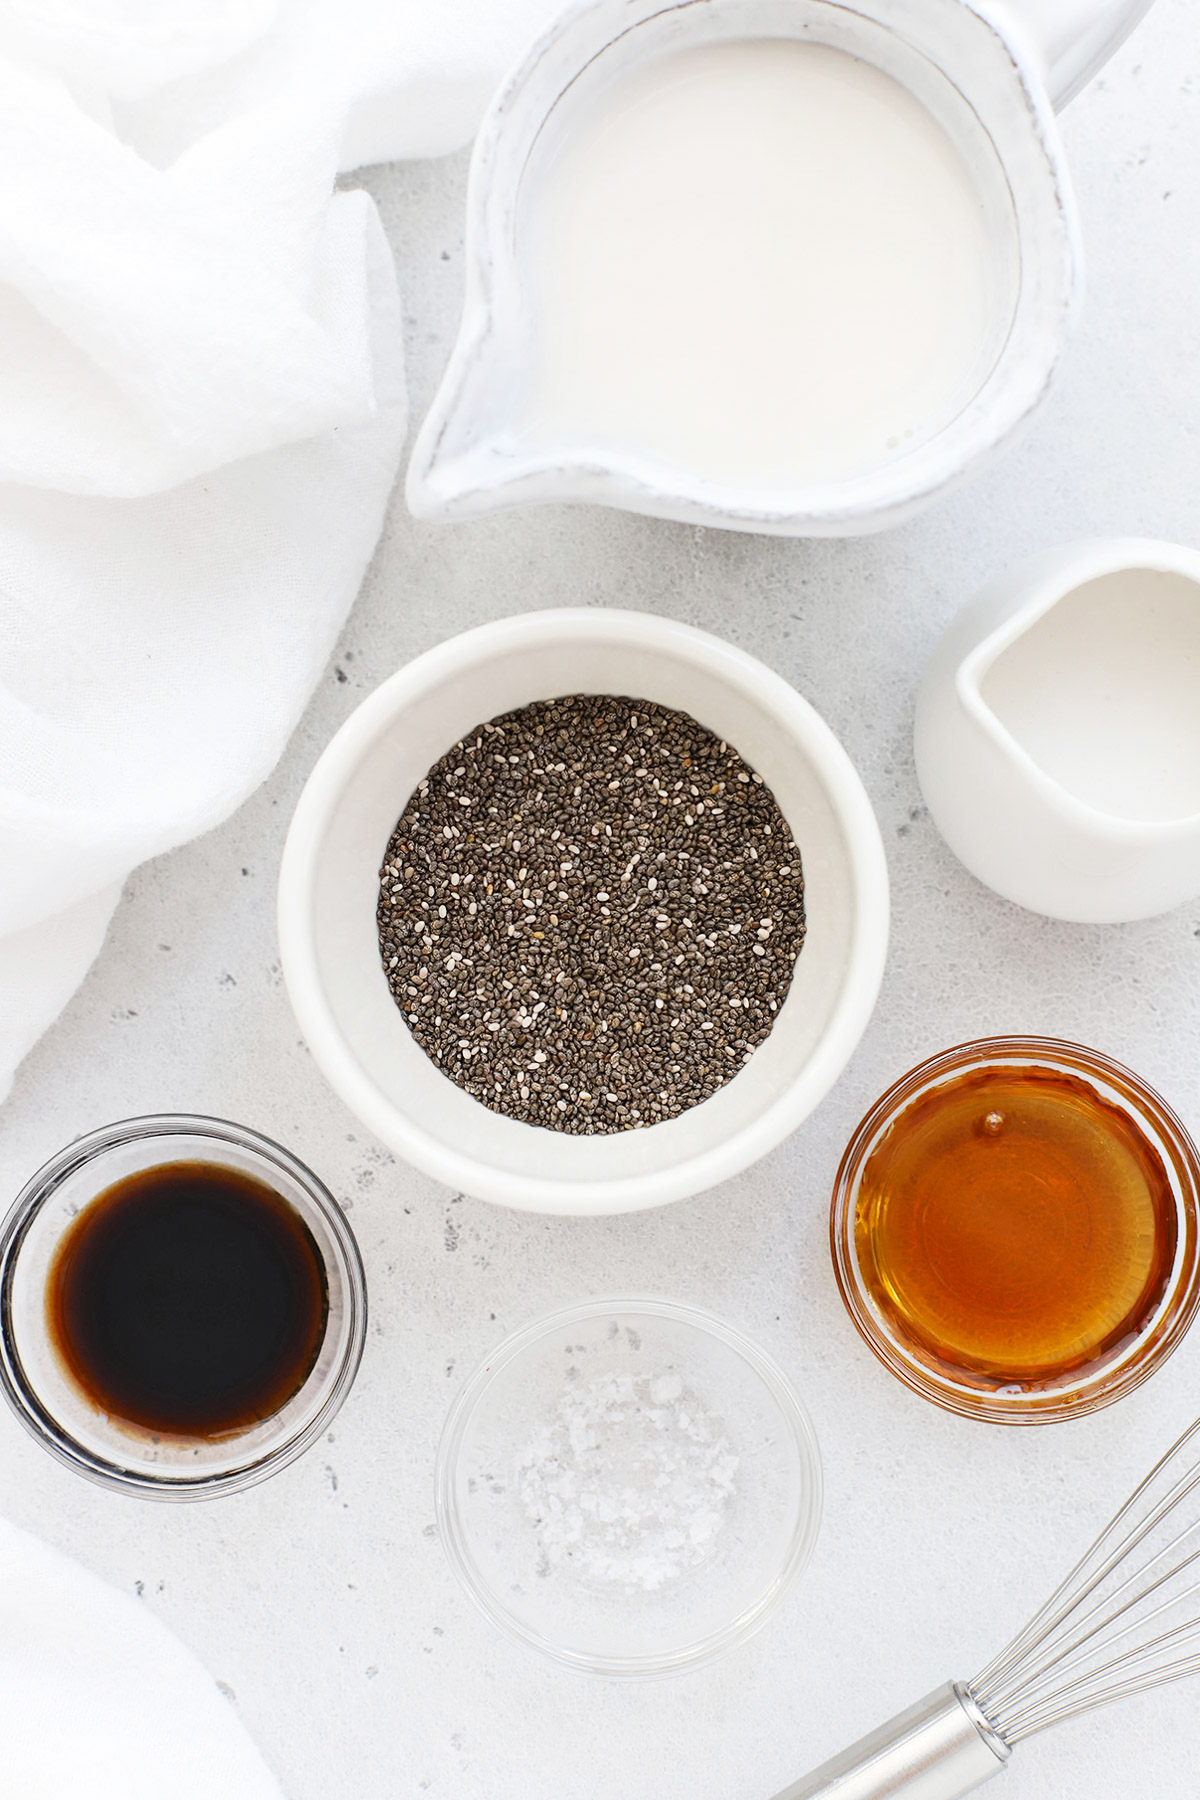 Ingredients for vanilla chia pudding